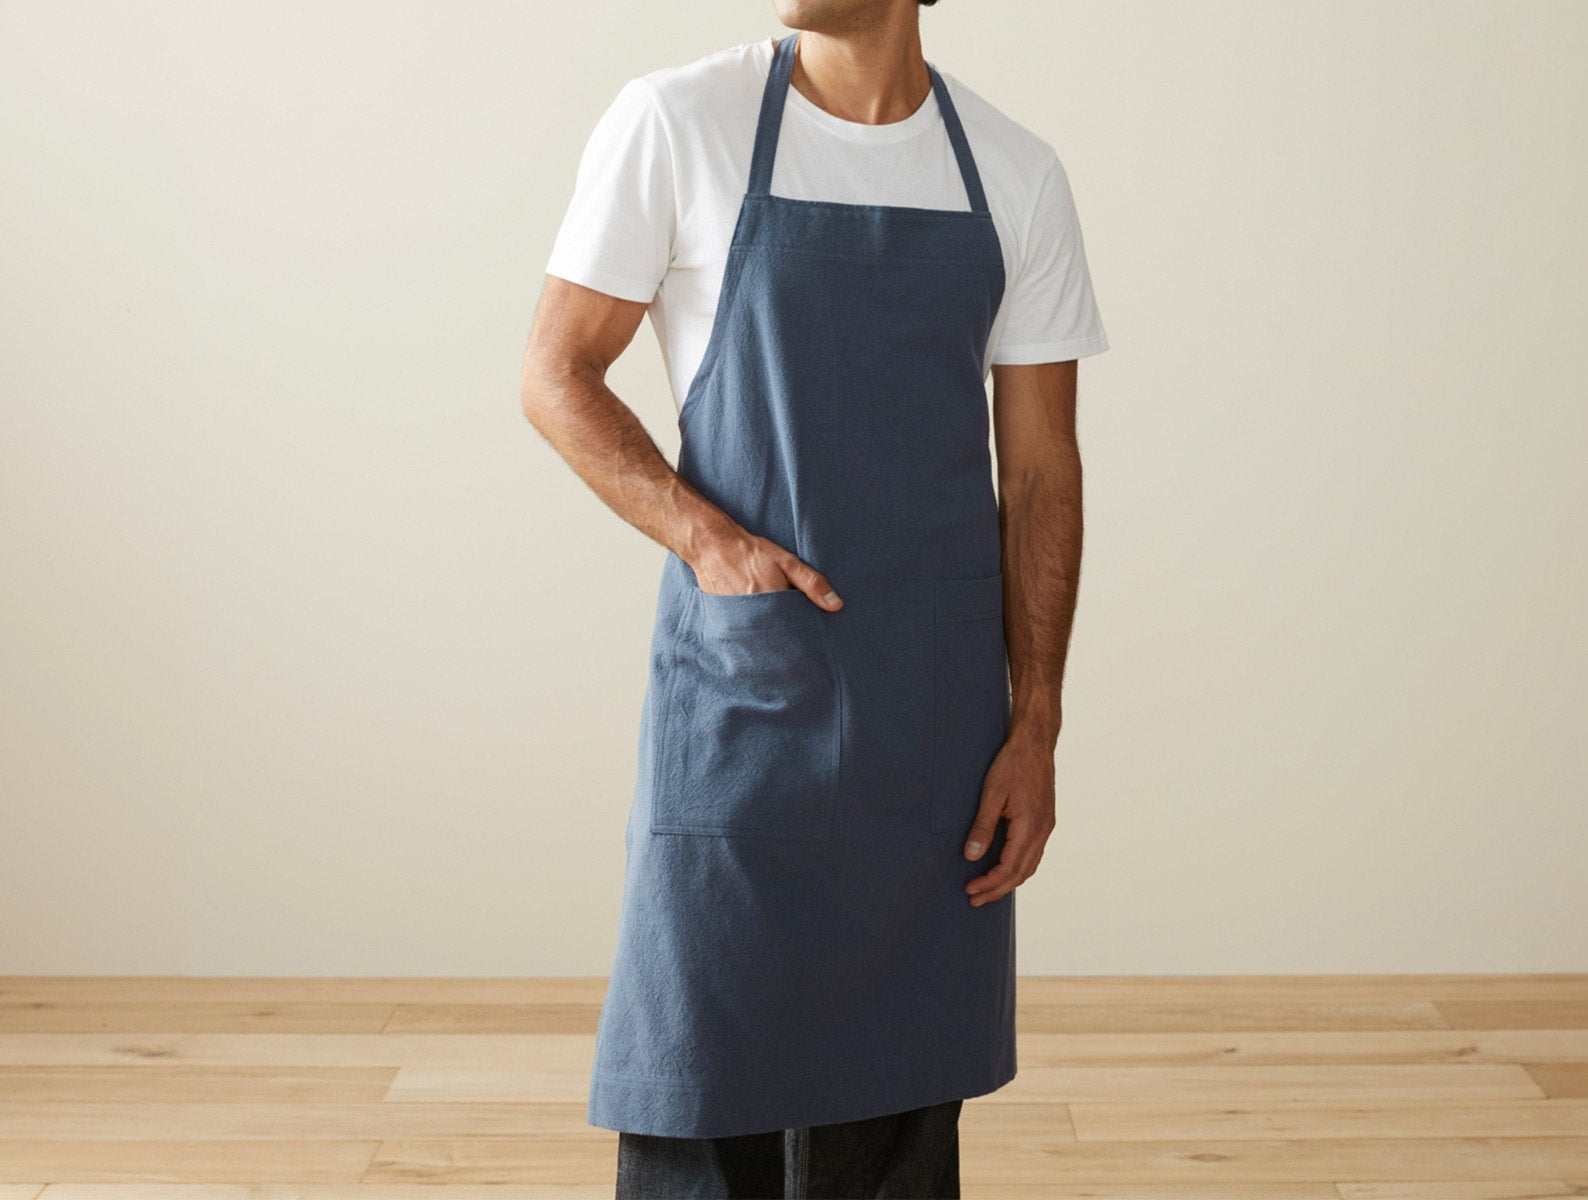 Best Selling Chef Aprons, Cooking Aprons